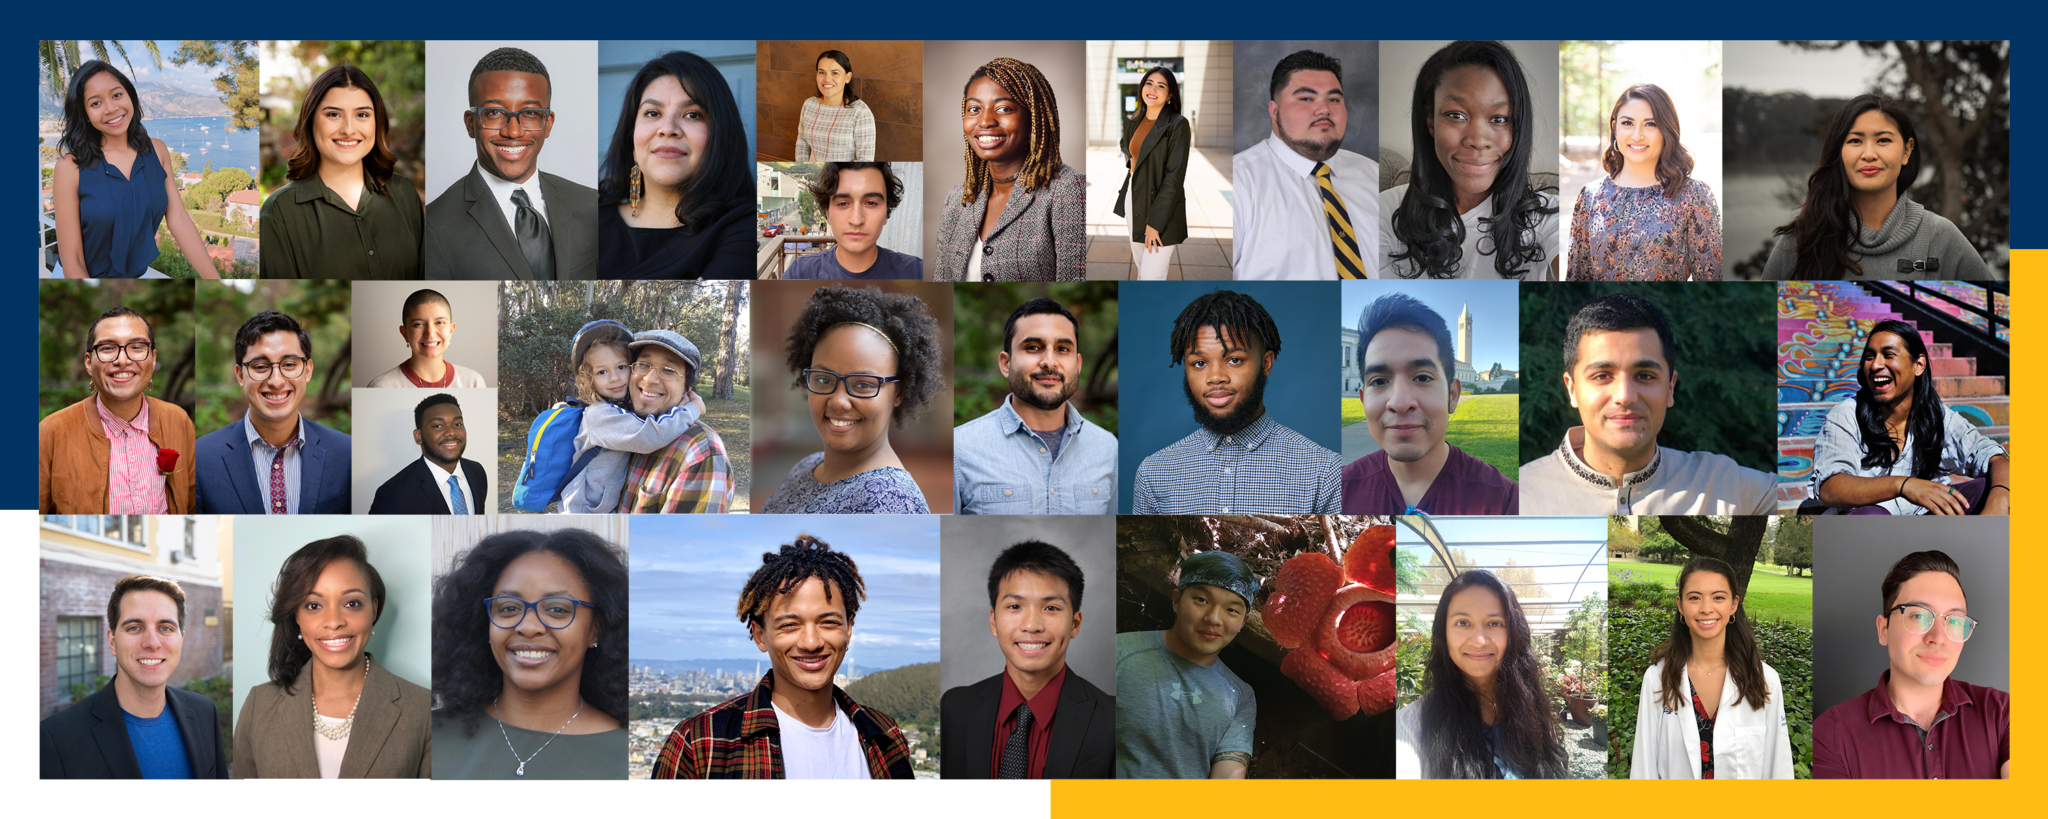 The faces of The Diversity and Community Fellows